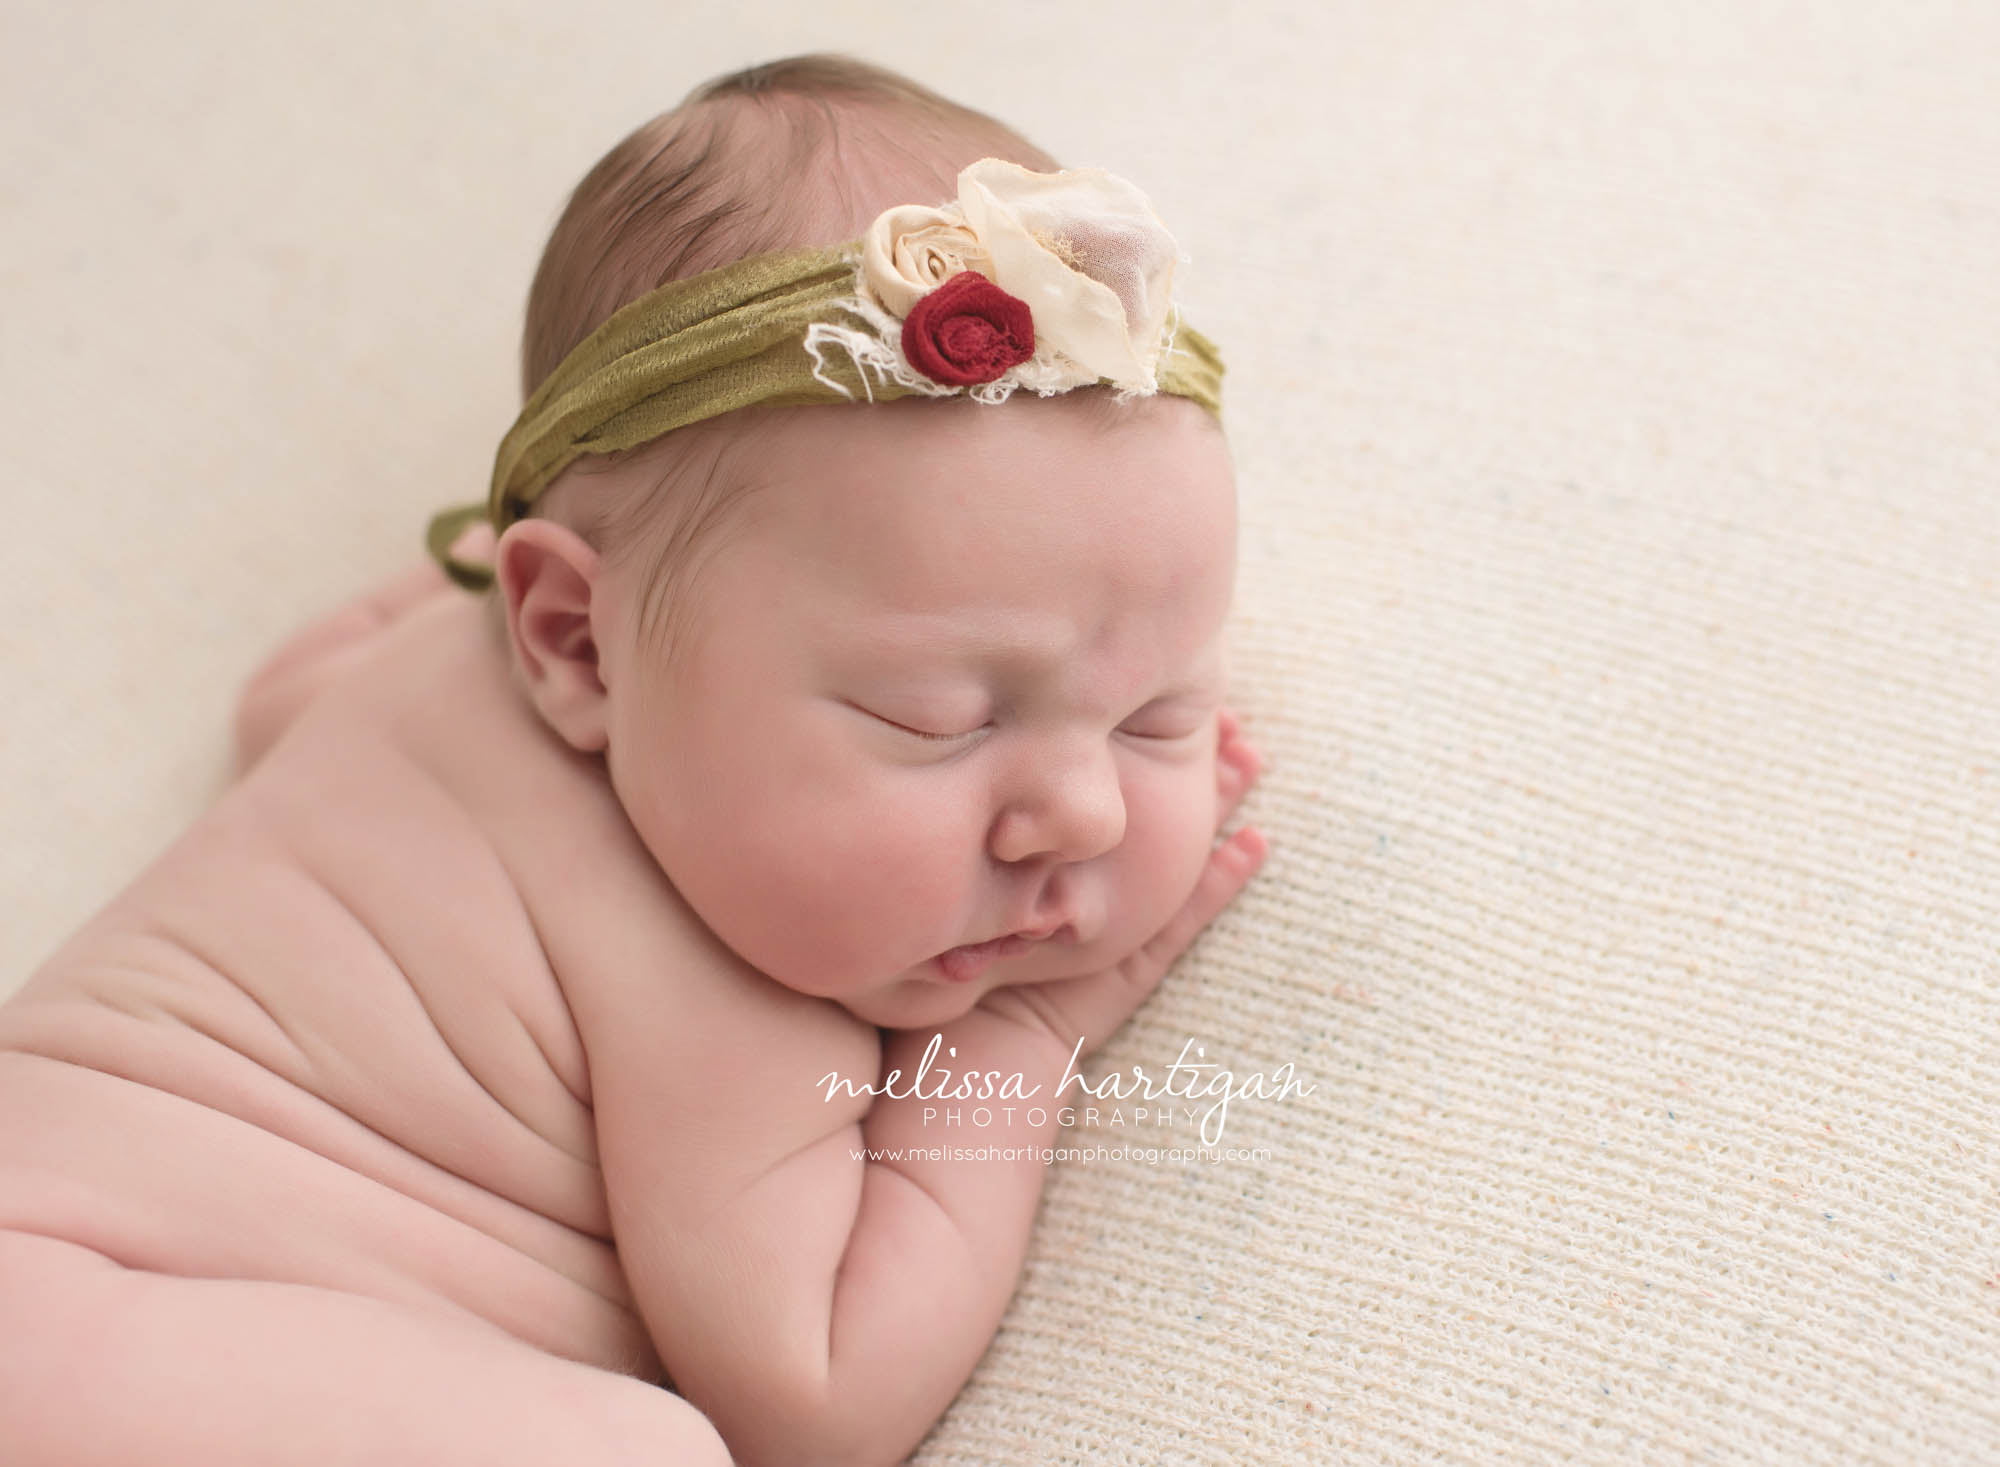 Melissa Hartigan Photography Connecticut Newborn Photographer Coventry Ct Middlefield CT baby Fairfield county Baby girl green headband with flowers sleeping head on hands CT newborn session